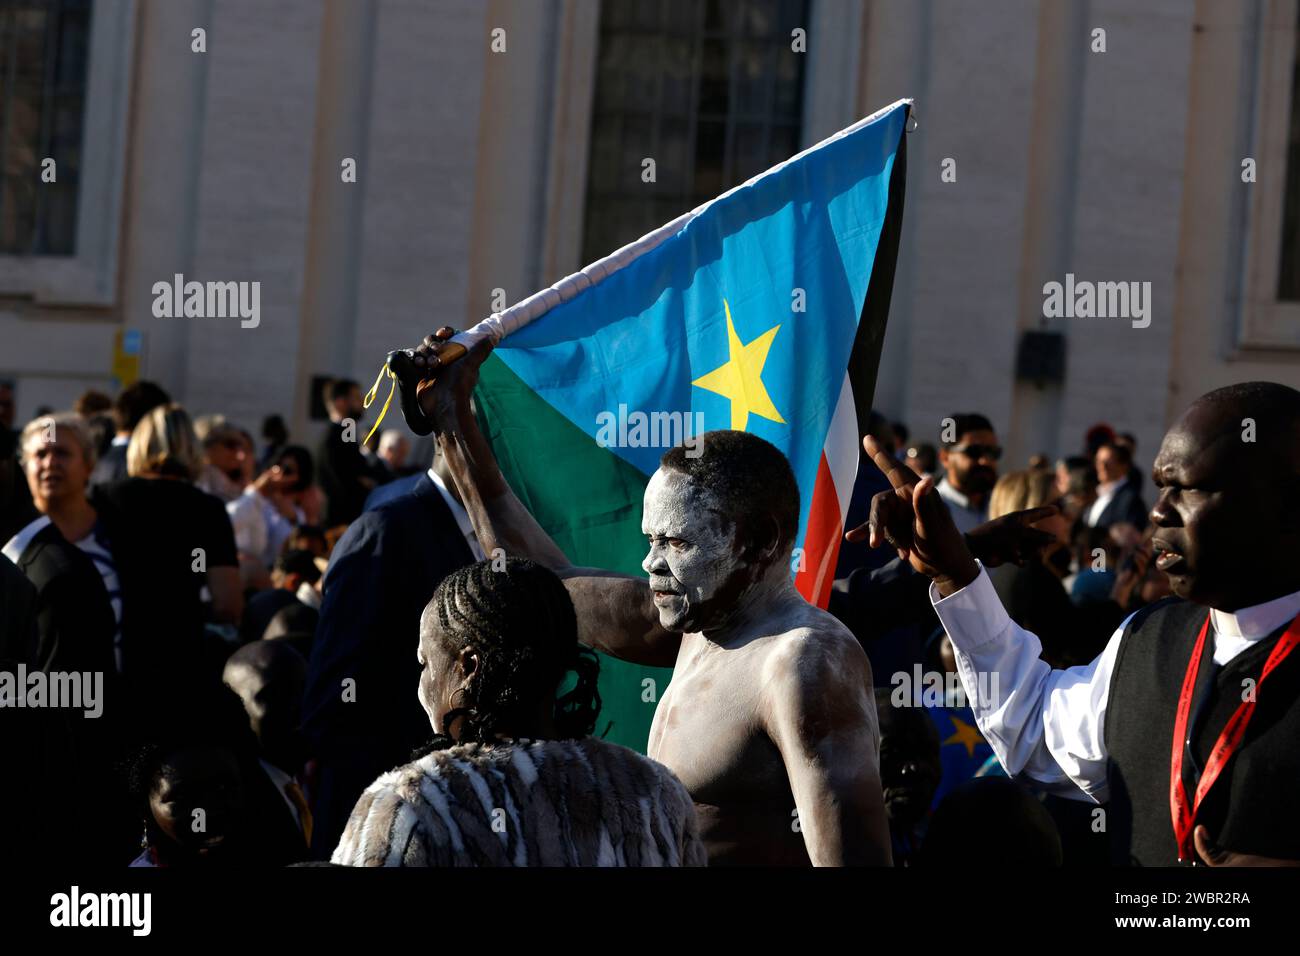 A faithful waving a South Sudanese flag waits for the start of a consistory in St. Peter Square at the Vatican, September 30, 2023. Stock Photo